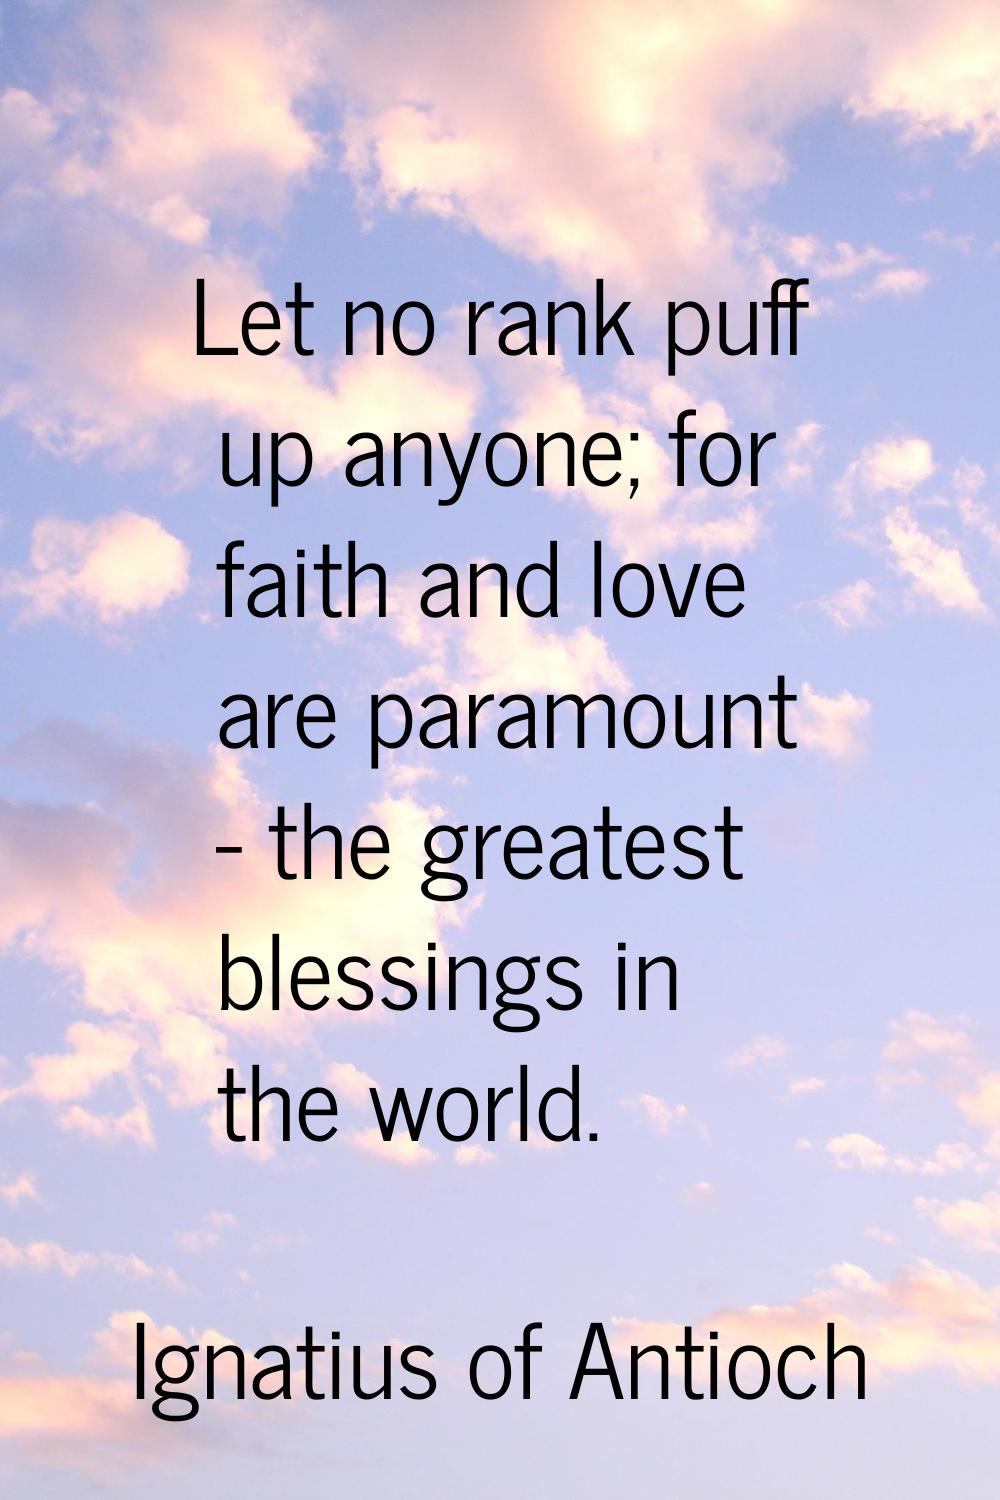 Let no rank puff up anyone; for faith and love are paramount - the greatest blessings in the world.